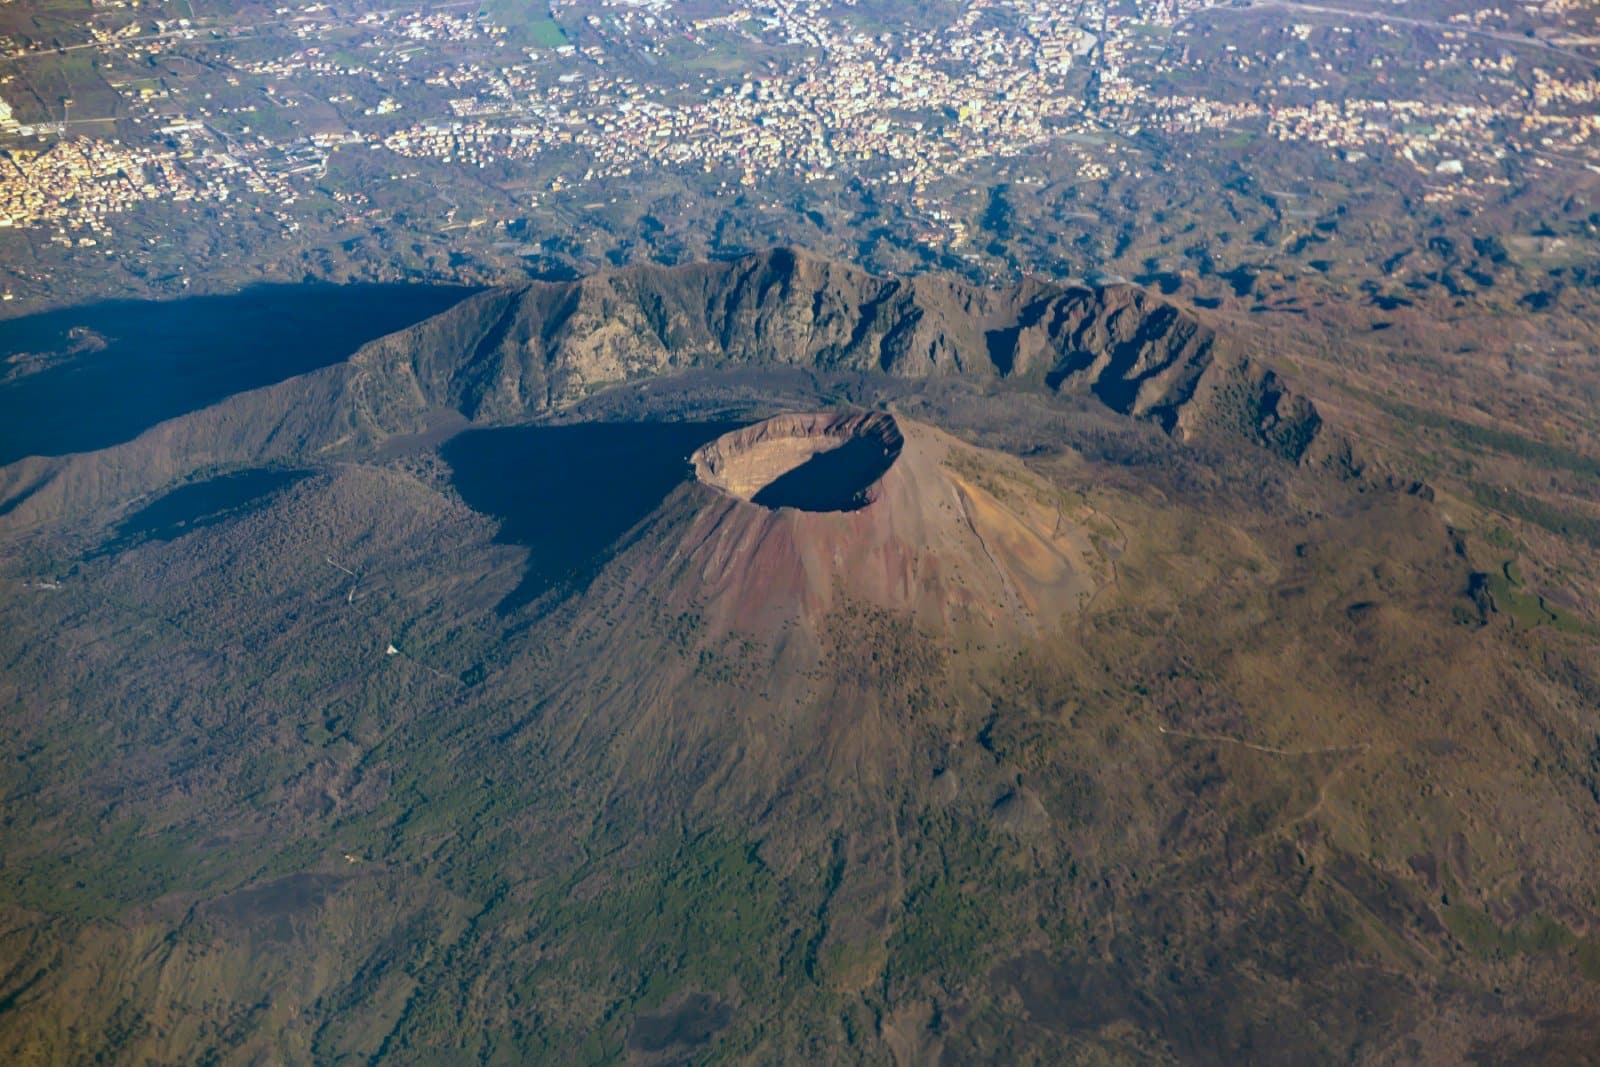 <p><span>The infamous Mount Vesuvius, a symbol of nature’s unpredictable power, offers a unique historical and geological exploration. Overlooking the bustling city of Naples, this active volcano is best known for its catastrophic eruption in AD 79, which buried the ancient cities of Pompeii and Herculaneum.</span></p> <p><span>Hiking to the summit of Vesuvius provides a physical challenge and an educational journey into the history of one of the world’s most famous volcanic eruptions. The panoramic views from the crater rim are a stunning contrast between the serene beauty of the Bay of Naples and the latent power of the volcano.</span></p> <p><b>Insider’s Tip: </b><span>Combine your visit with a tour of the Pompeii ruins for a complete historical experience.</span></p> <p><b>When To Travel: </b><span>Spring (April to June) or fall (September to October) to avoid extreme heat.</span></p> <p><b>How To Get There: </b><span>Fly into Naples International Airport and take a short drive or a guided tour to Mount Vesuvius.</span></p>